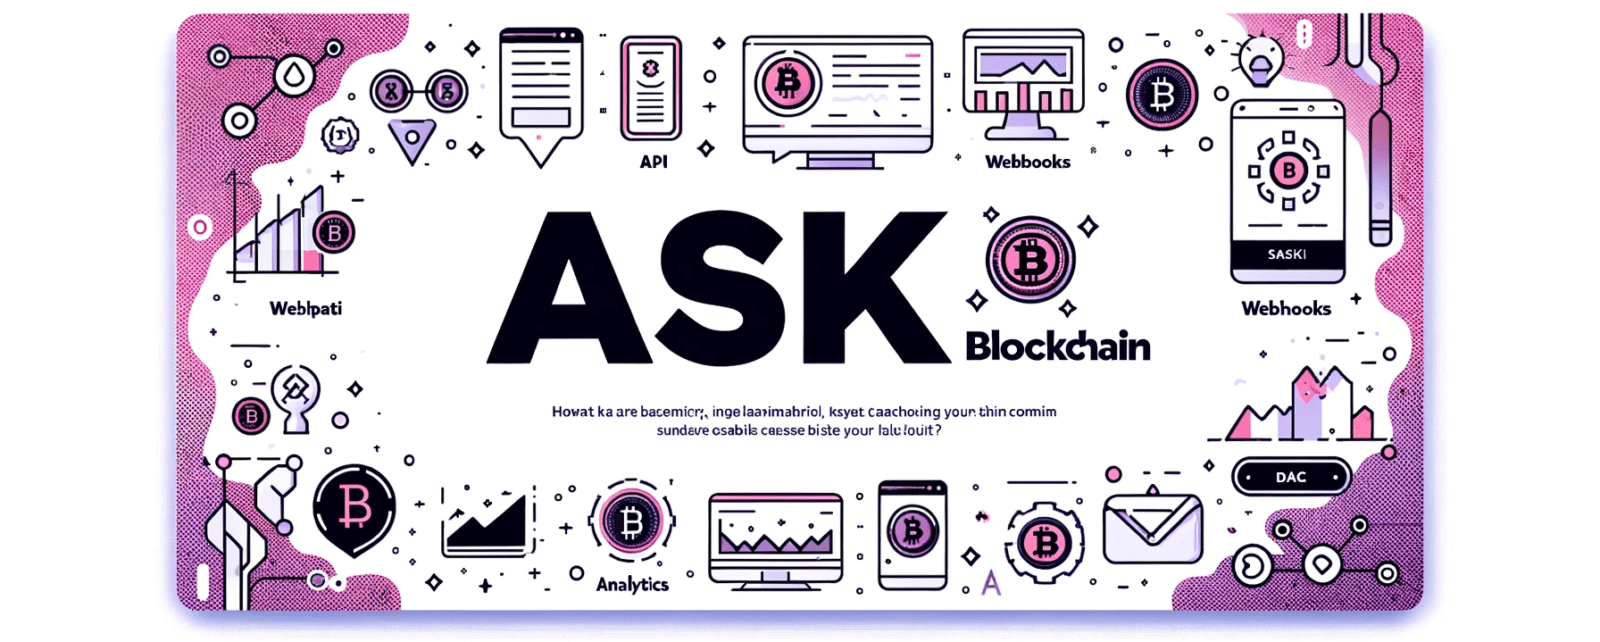 dalle-2023-12-19-20-22-01-design-a-clean-and-modern-wide-banner-for-ask-blockchain-ensuring-the-name-is-spelled-correctly-the-background-should-be-pure-white-to-ensure-it-b-e1703010724421